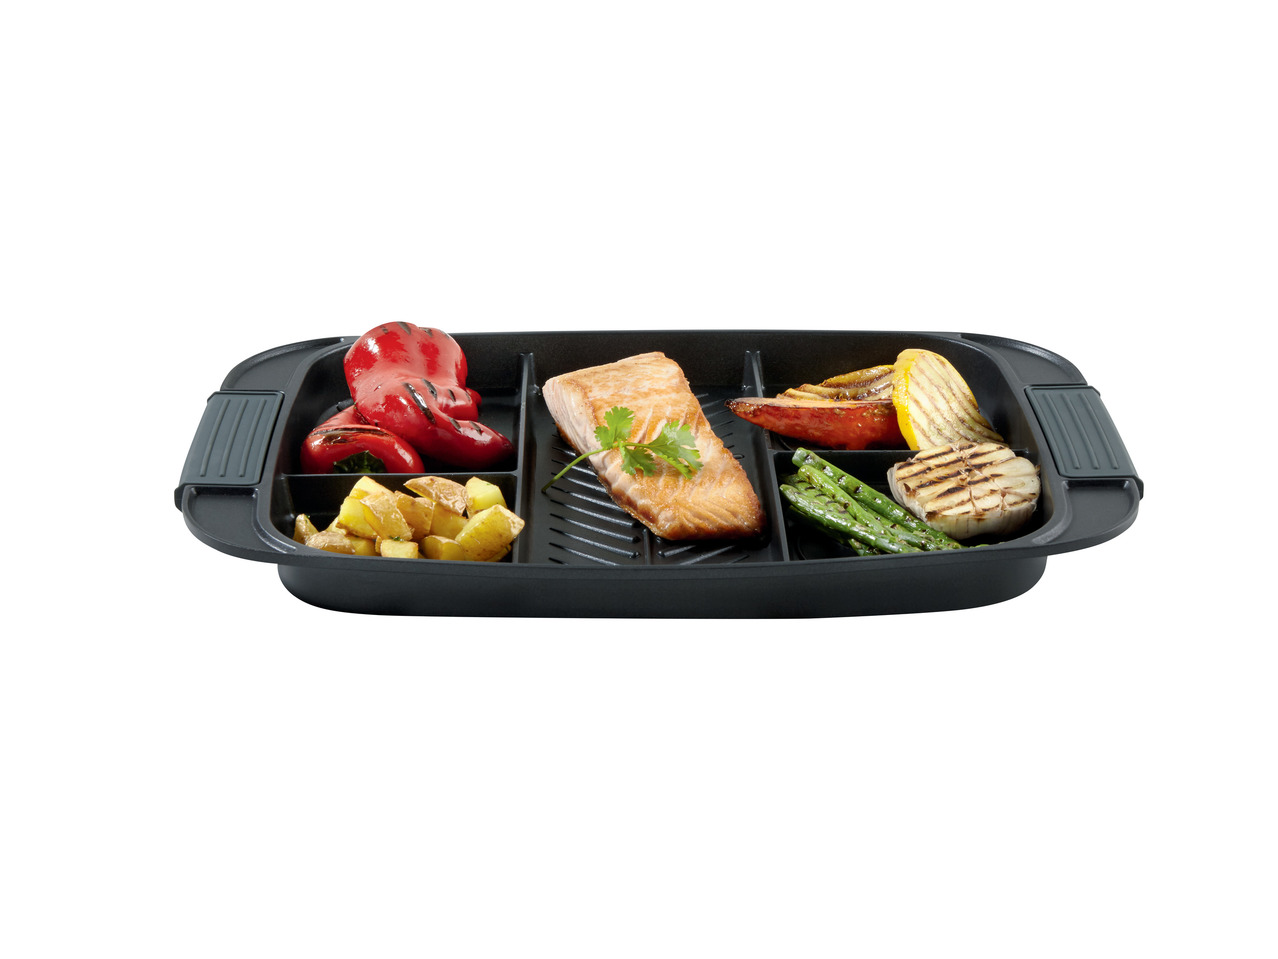 Multi-Section Pan or Multi-Section Griddle & Baking Tray